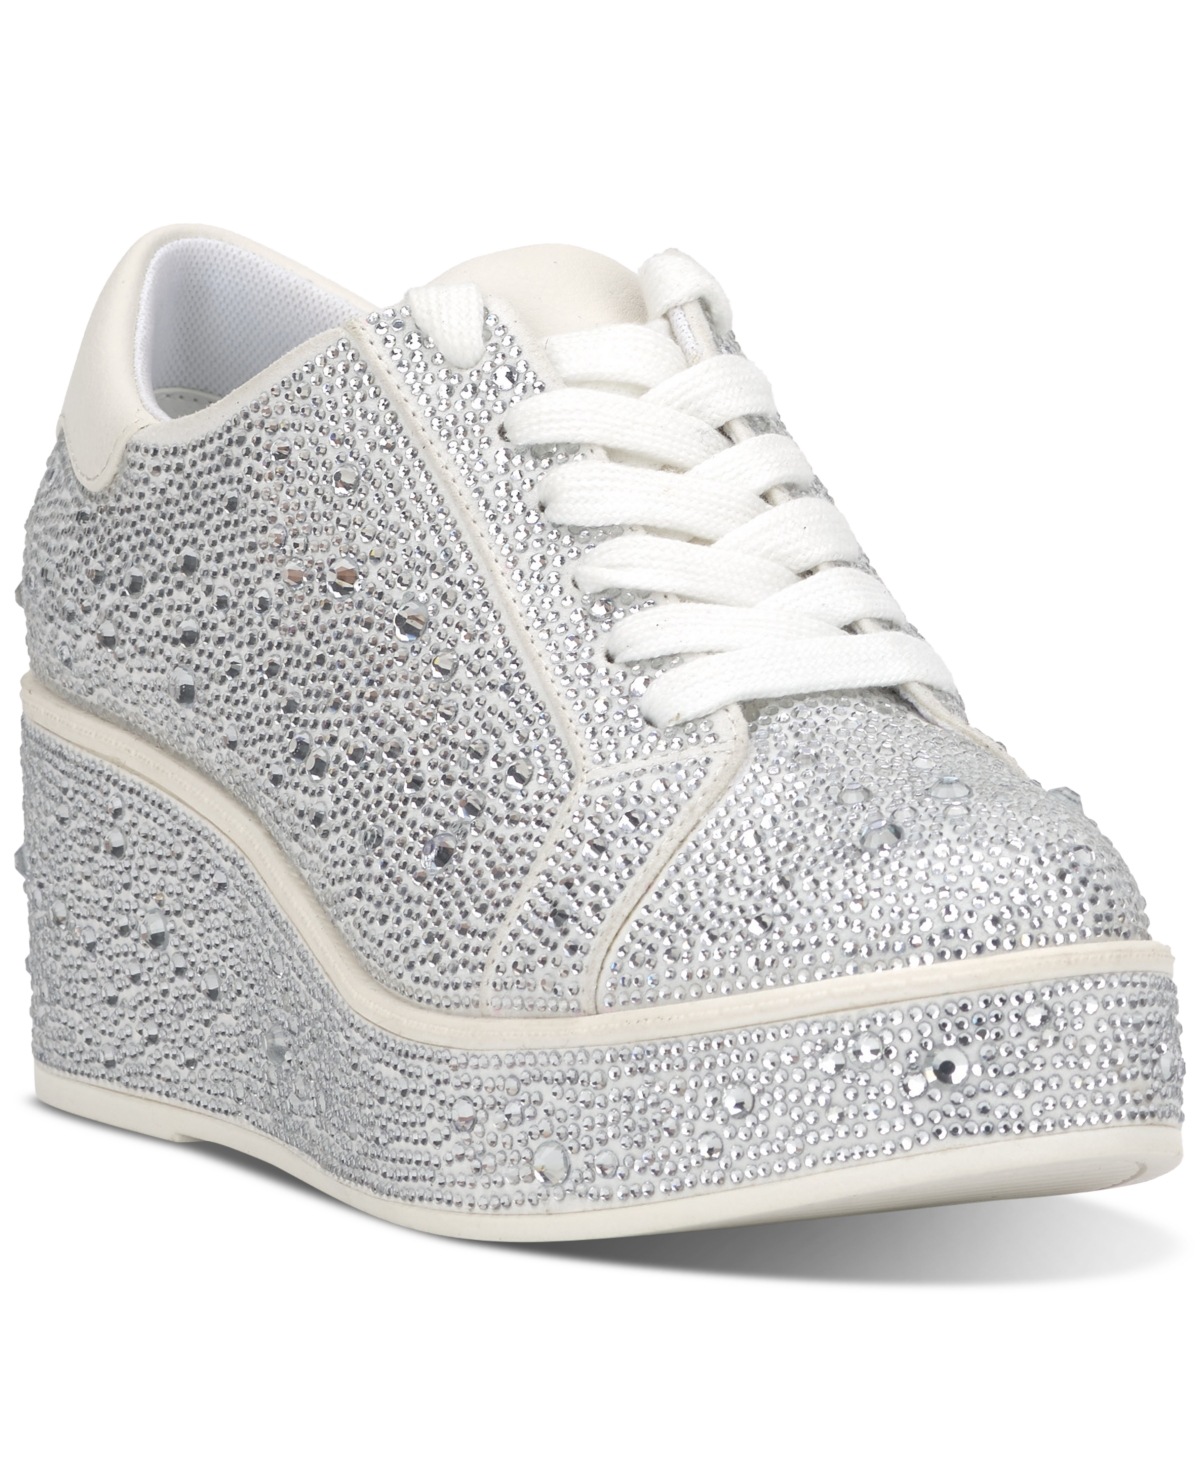 Women's Aideen Wedge Sneakers, Created for Macy's - Silver Bling